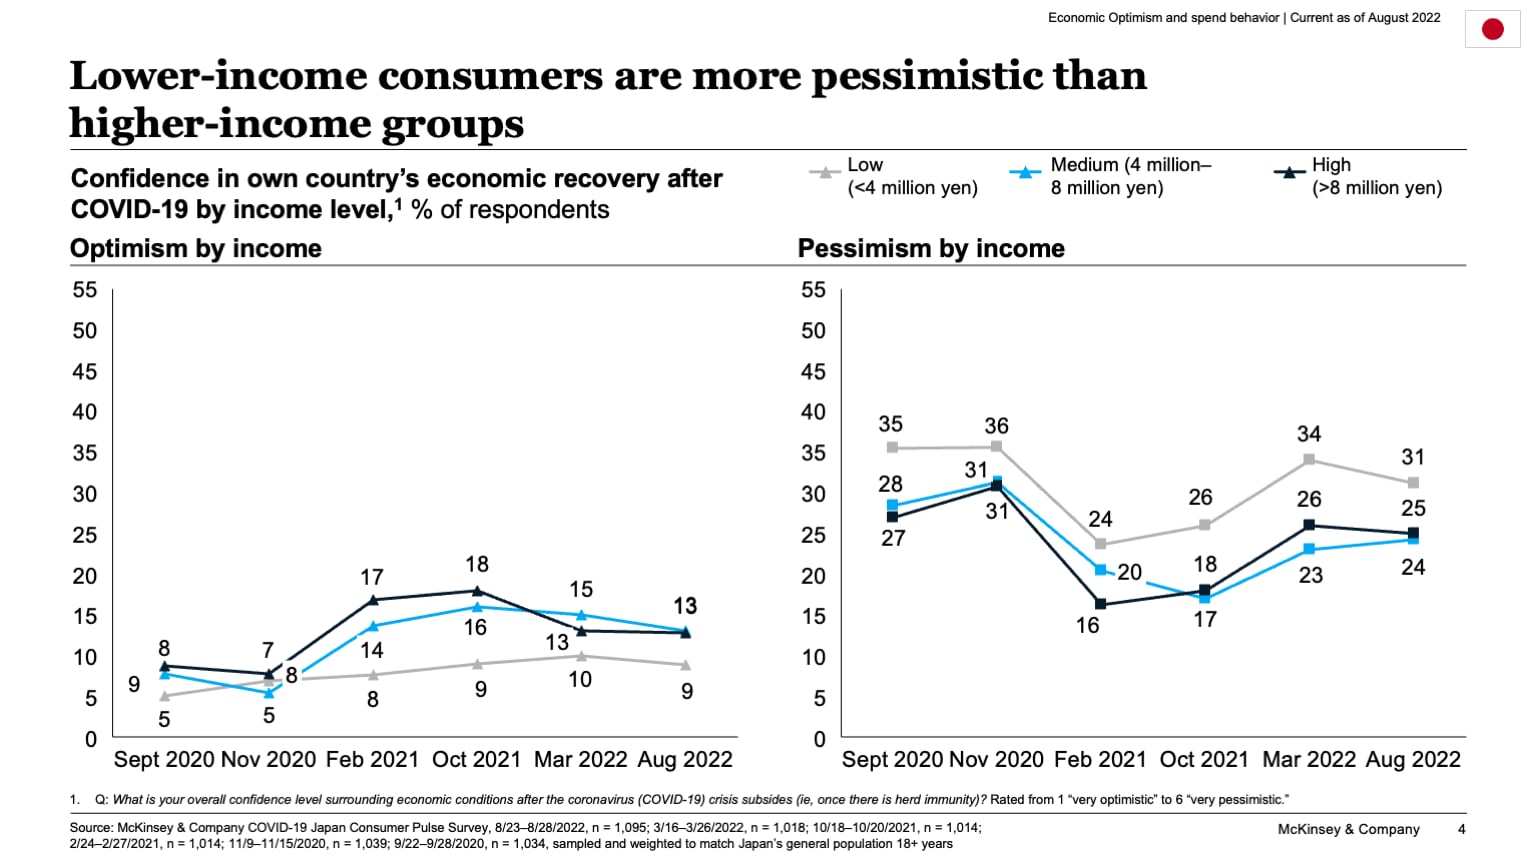 Lower-income consumers are more pessimistic than higher-income groups